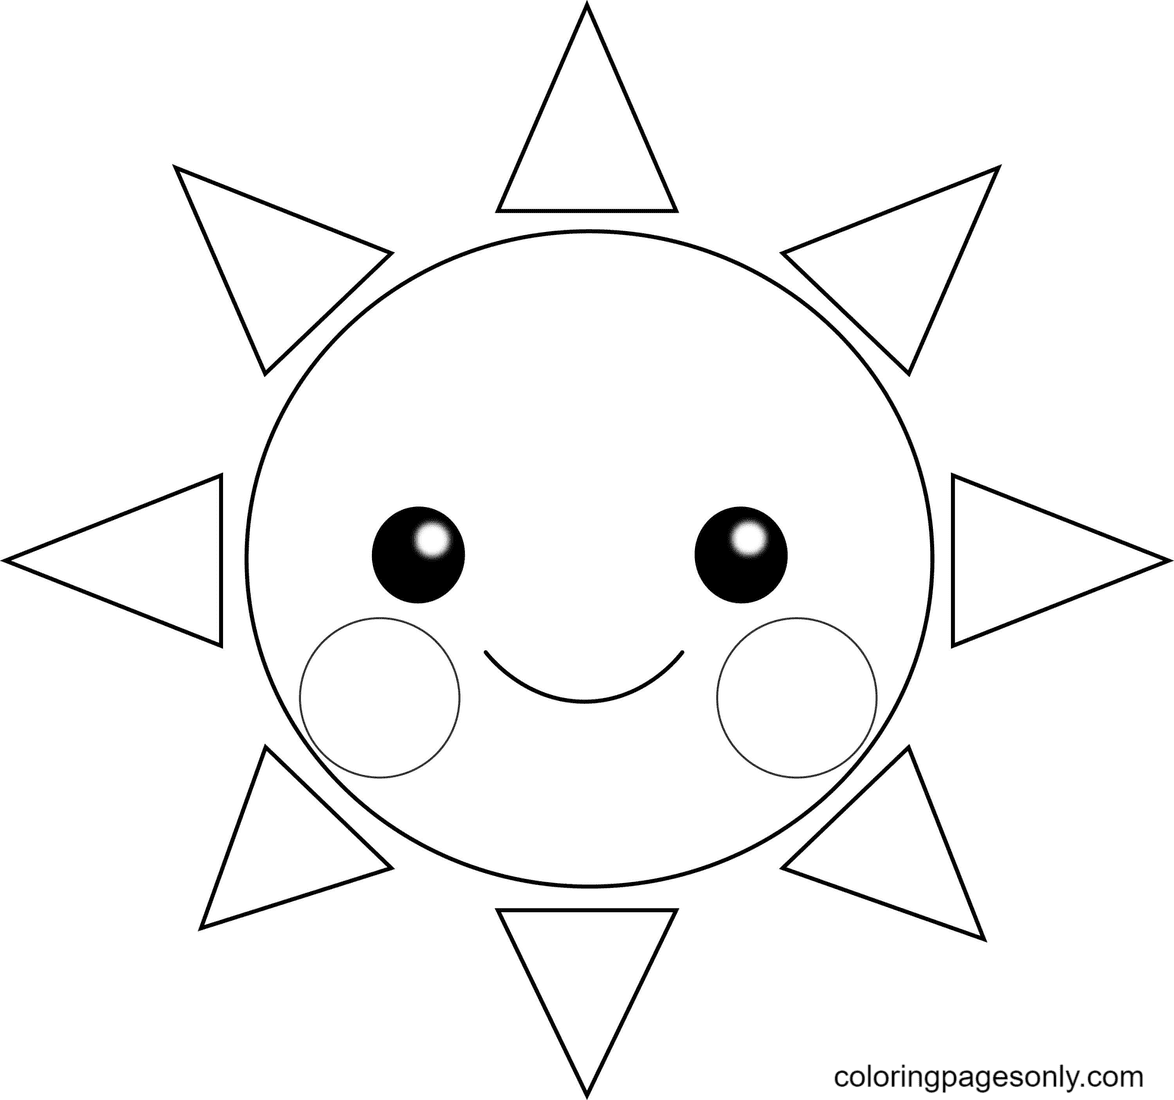 Smiling Sun Free Coloring Page